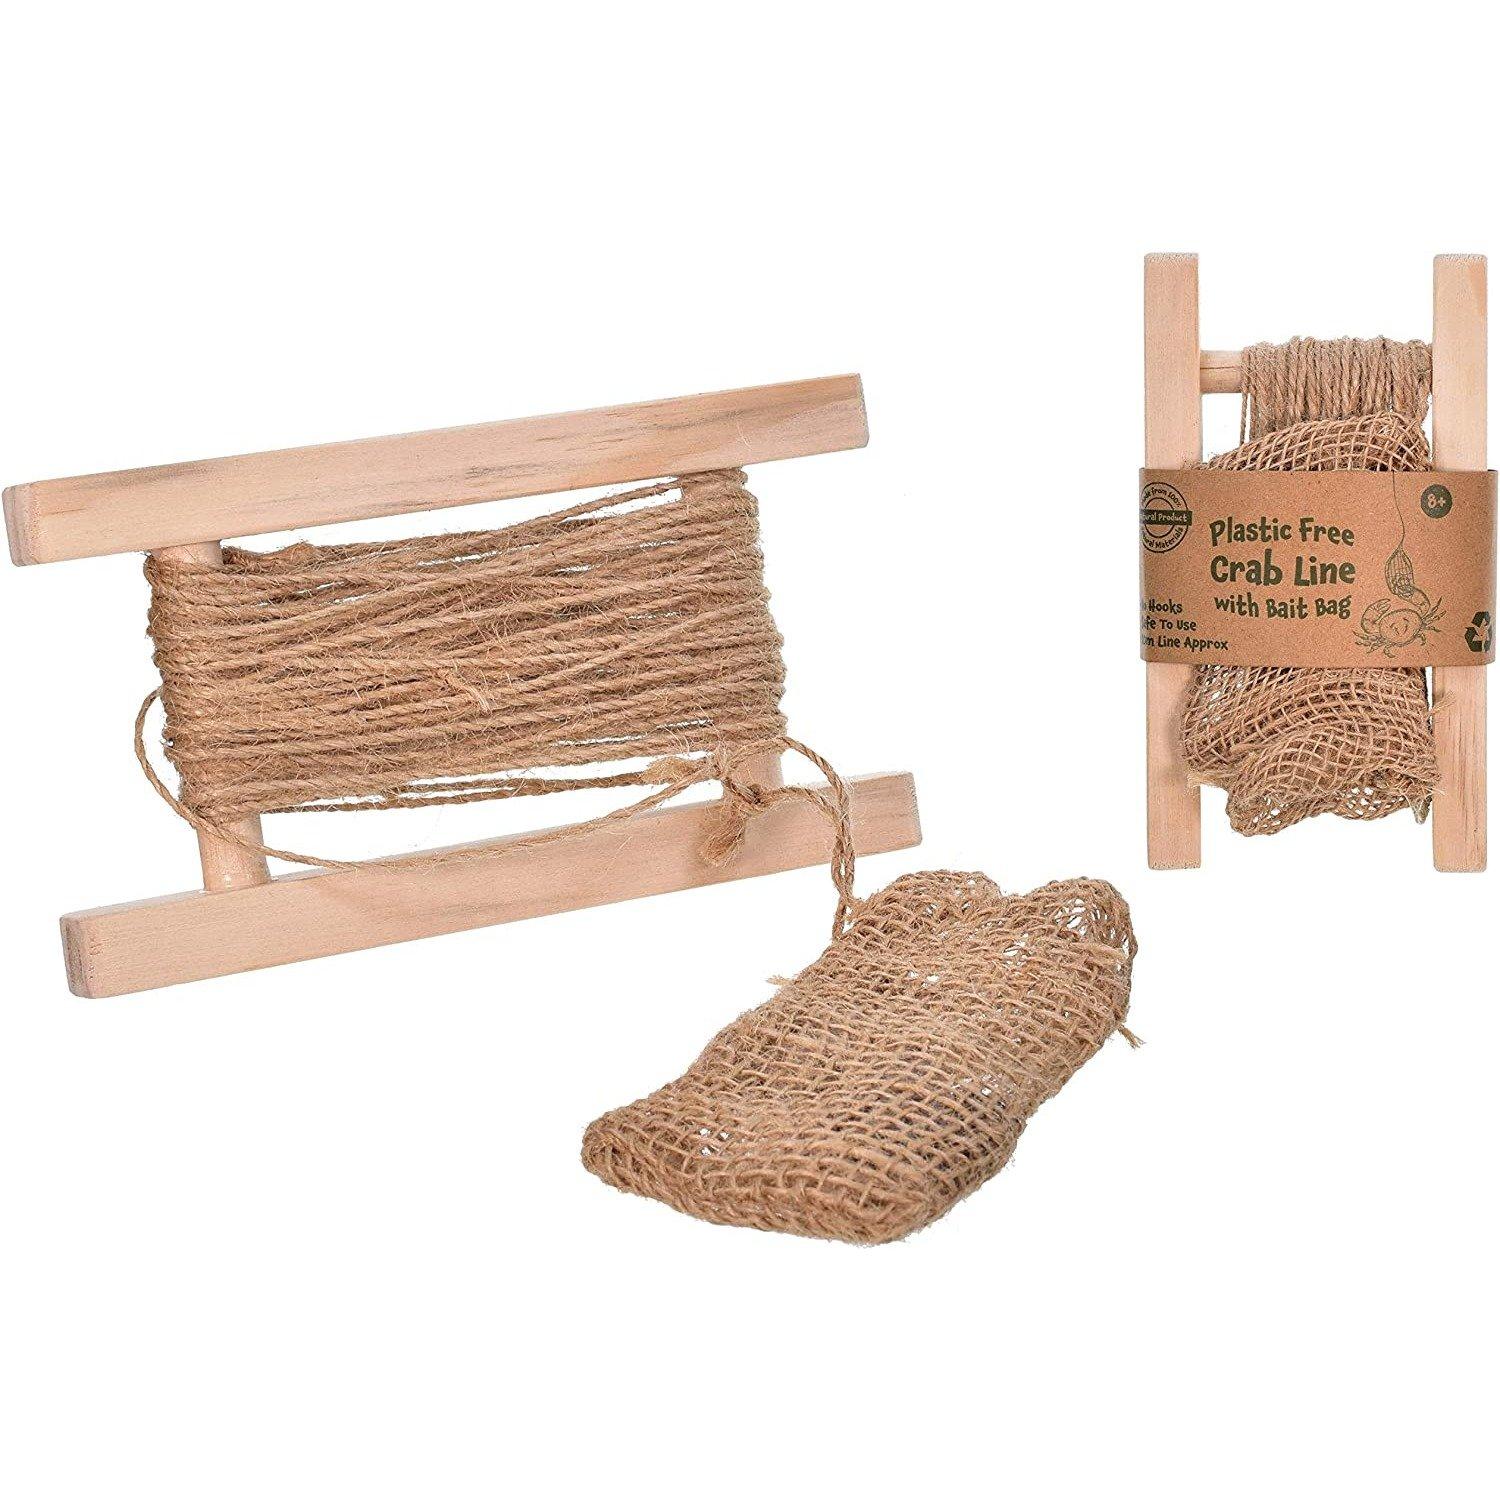 Wooden Crab Line With Bait Bag